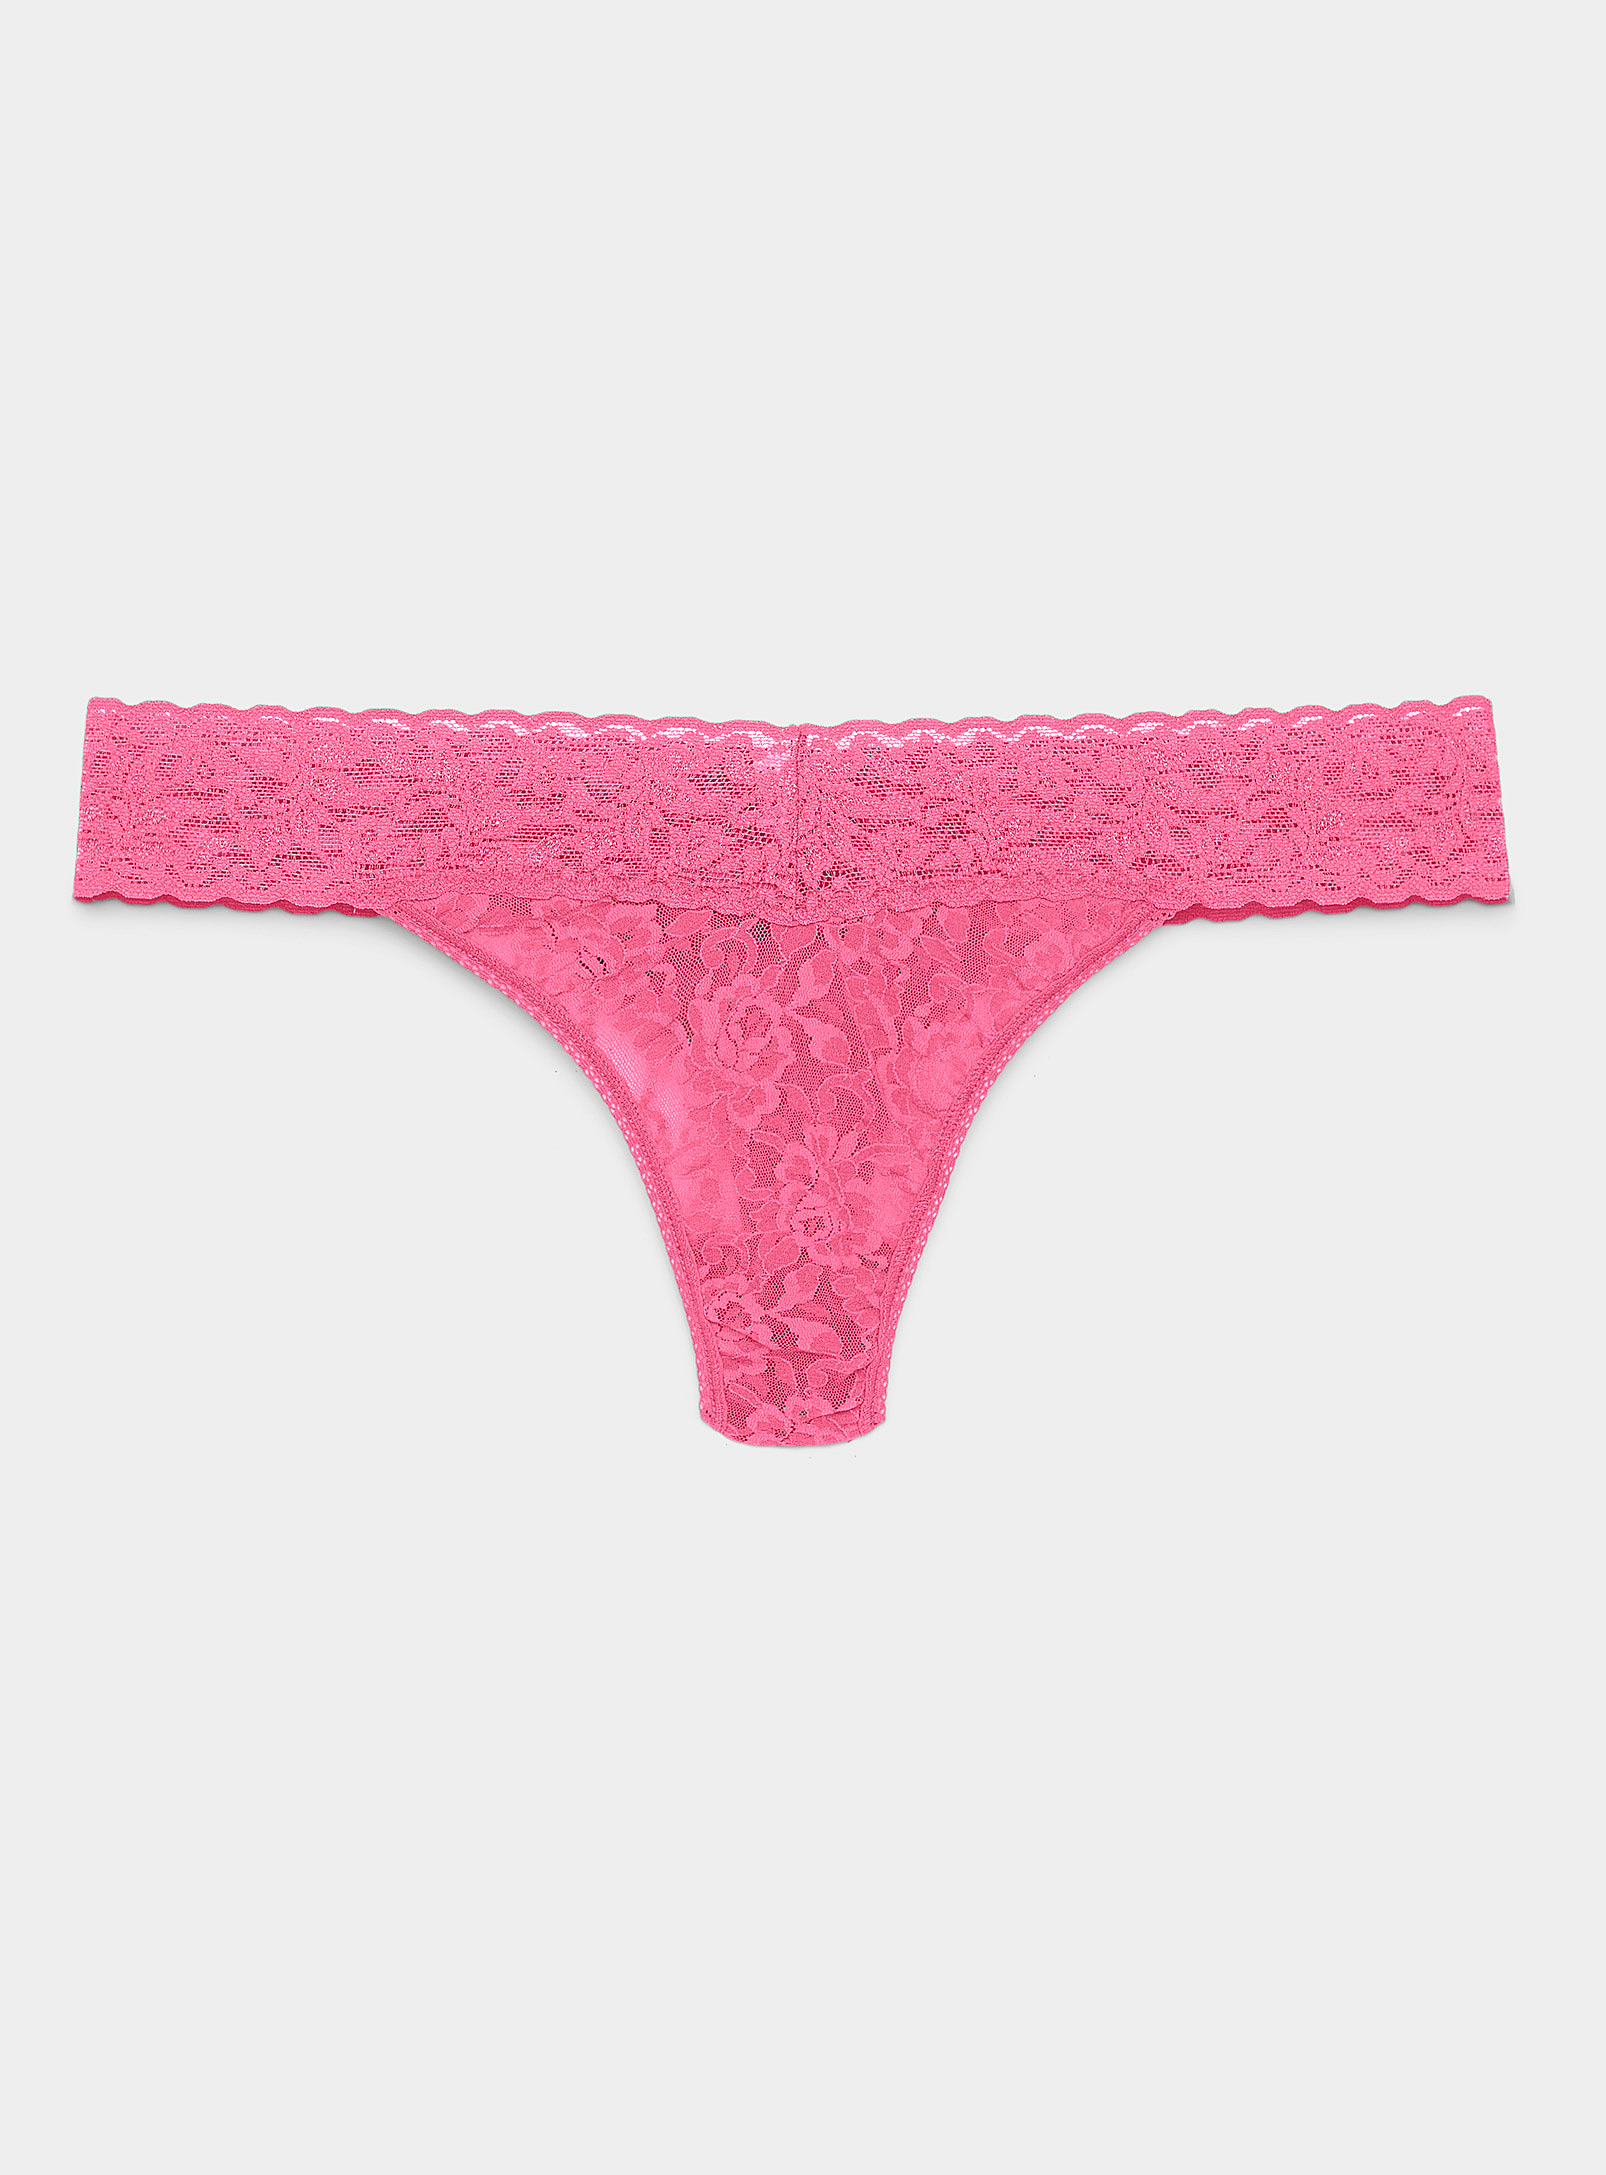 Hanky Panky Original Rise Lace Thong In Pink